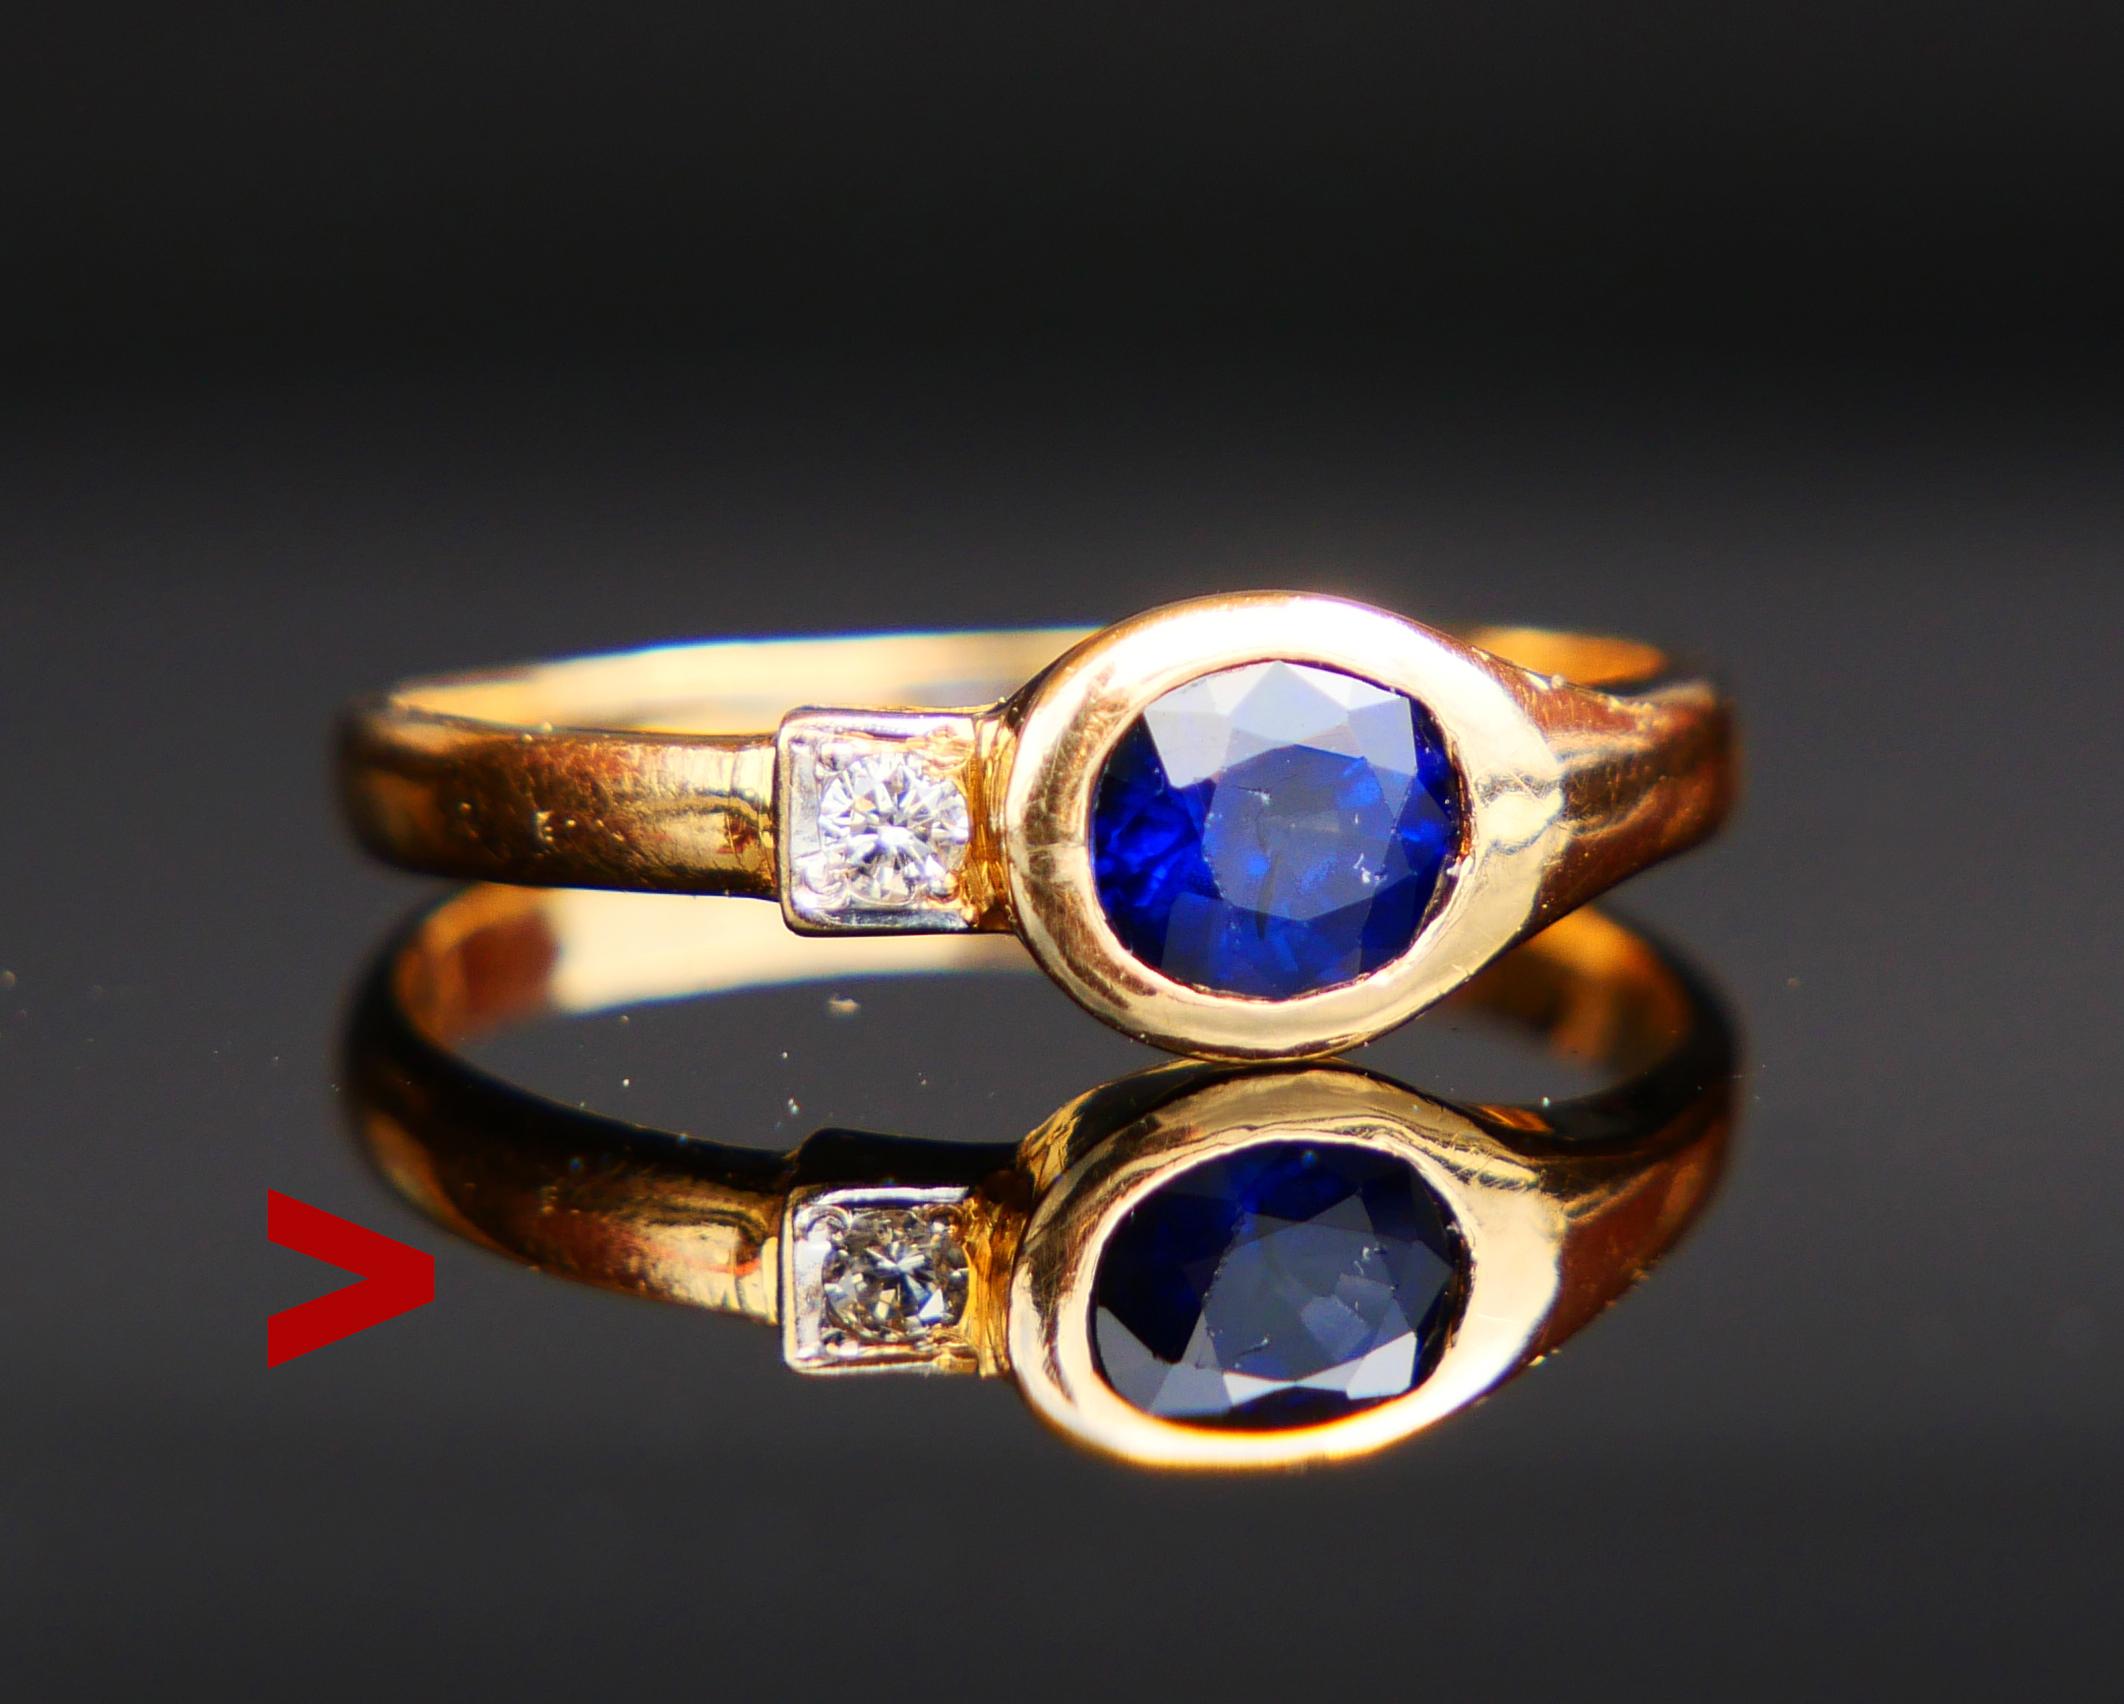 Beautiful Two - stones Ring with bezel set natural Blue Sapphire stone oval cut 5.5 mm x 4.5 mm x 3.2 mm deep / ca. 0.6 ct. and square pave set old diamond cut natural Diamond Ø 2mm / 0.04ct / H,I / VS. Sapphire is natural of darker Blue color .